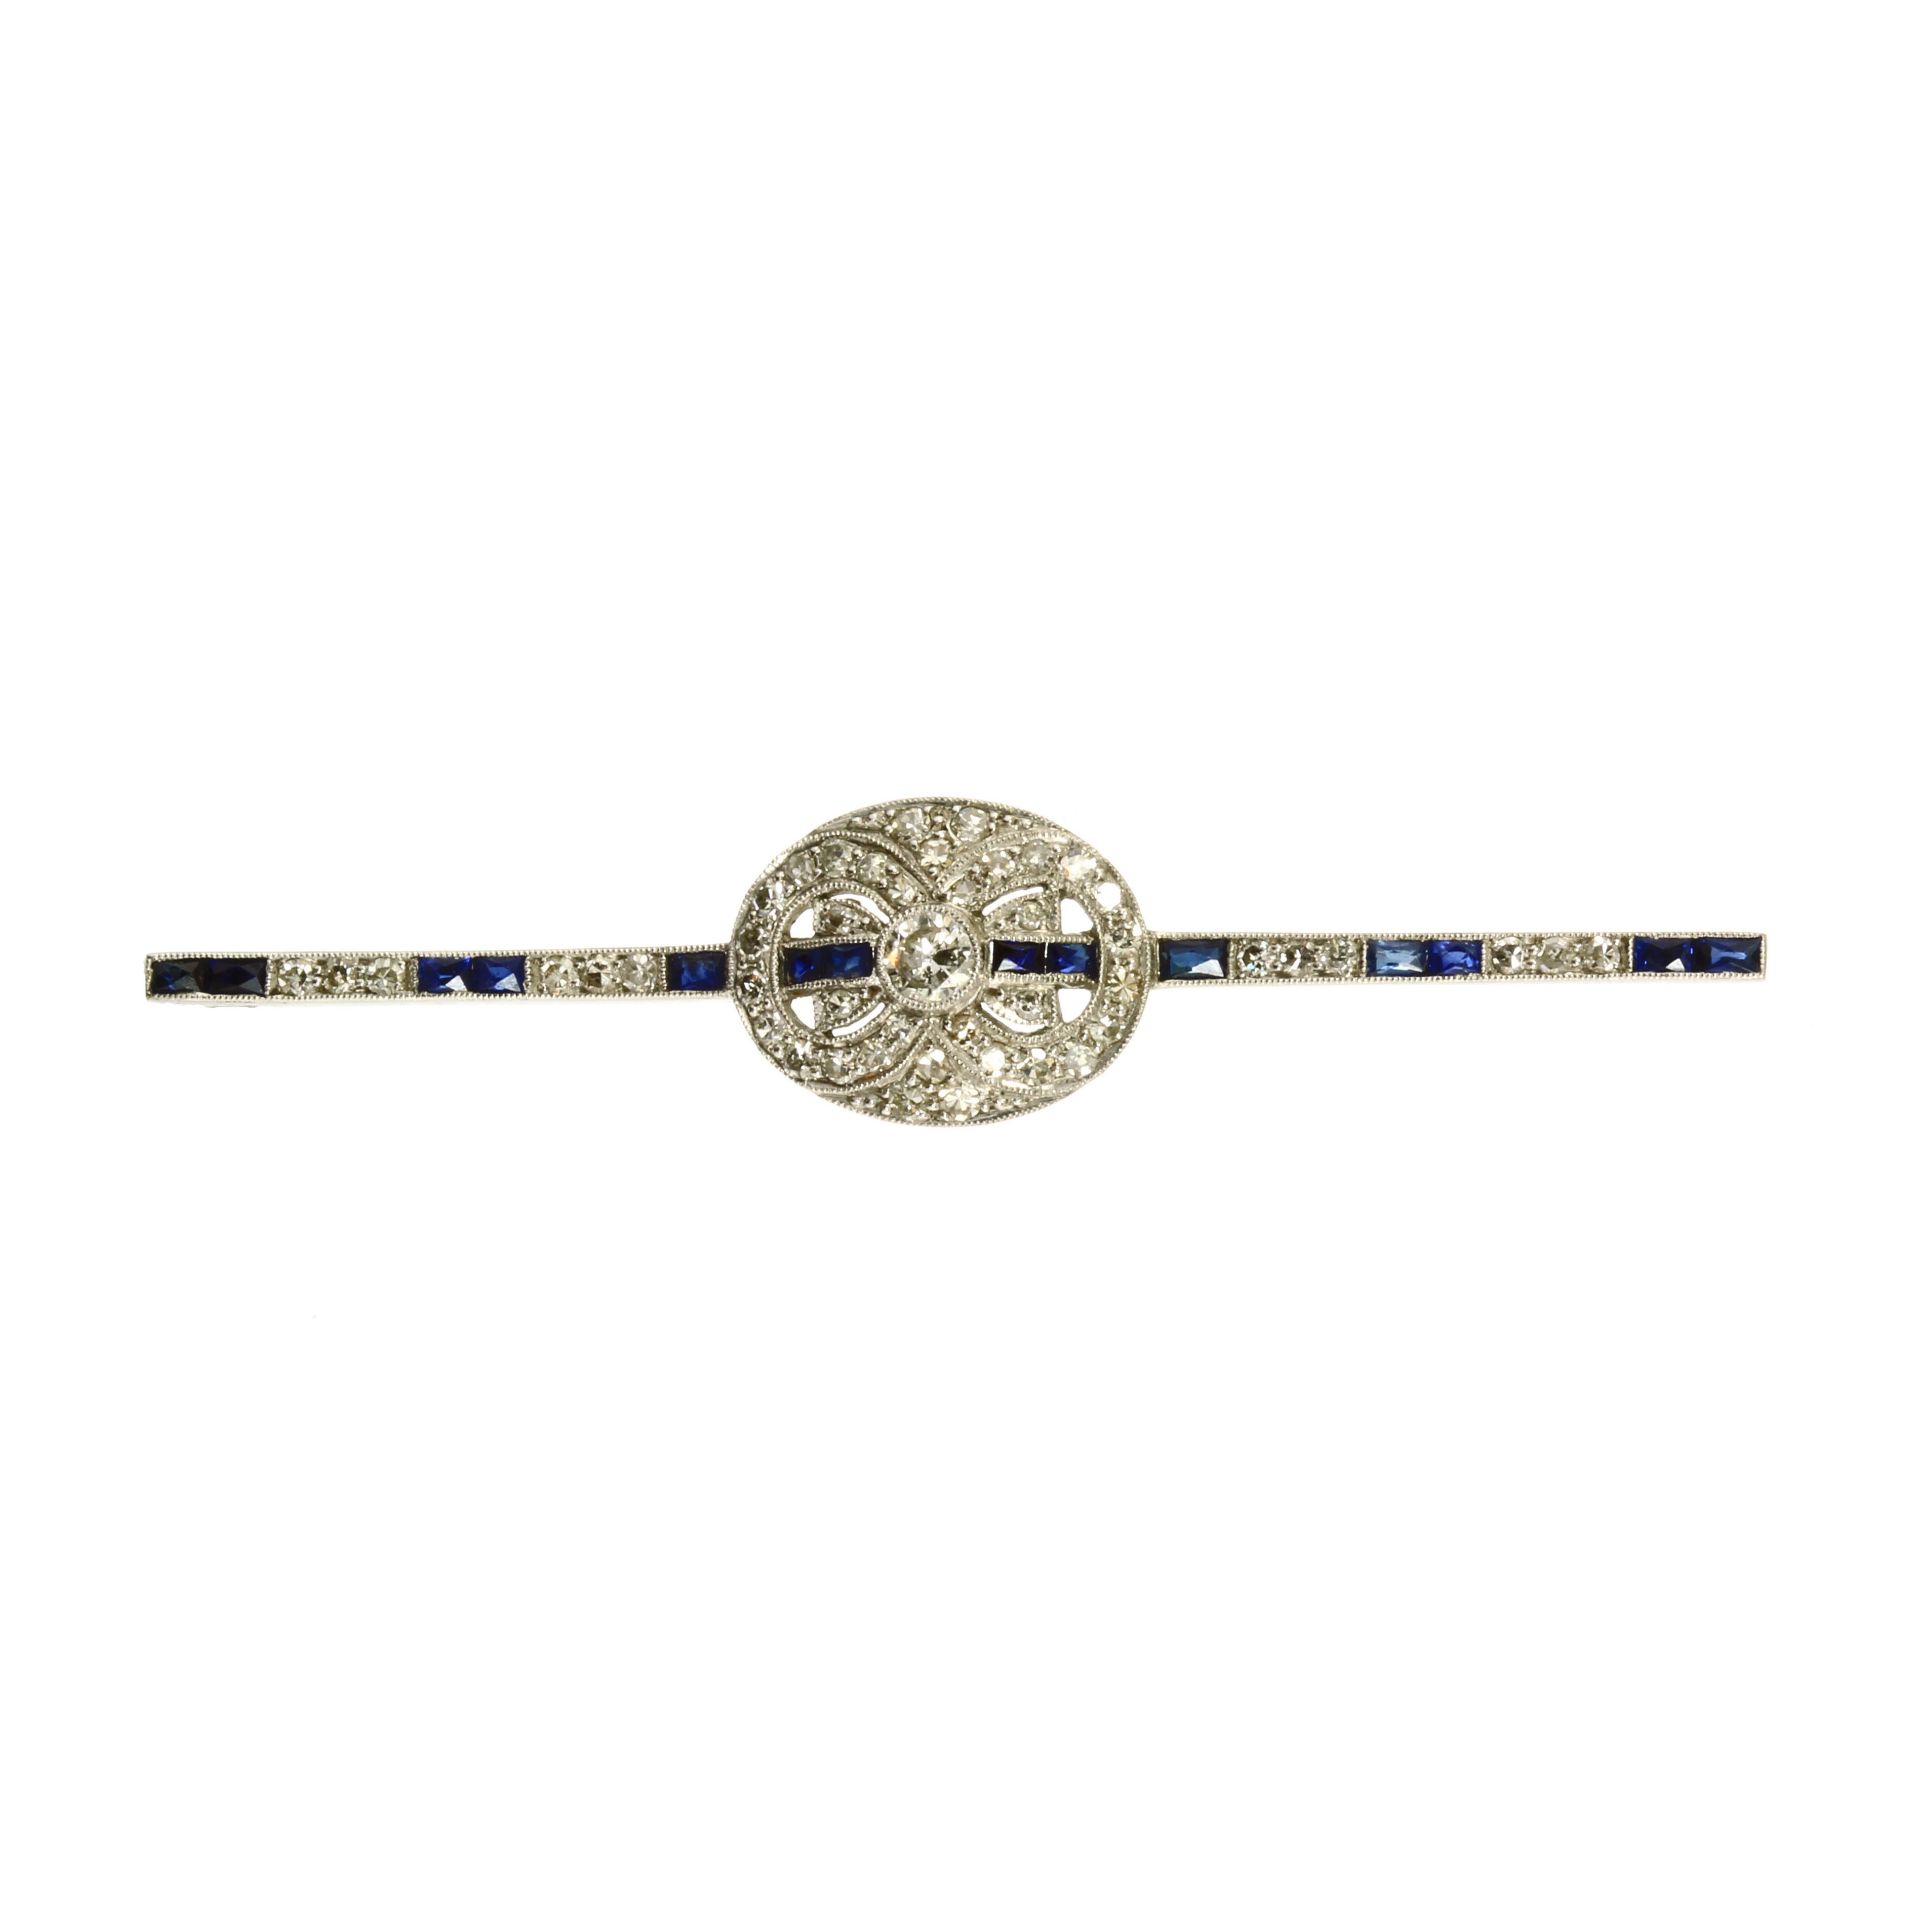 AN ART DECO DIAMOND AND SAPPHIRE BAR BROOCH in platinum or white gold, the oval motif set with a